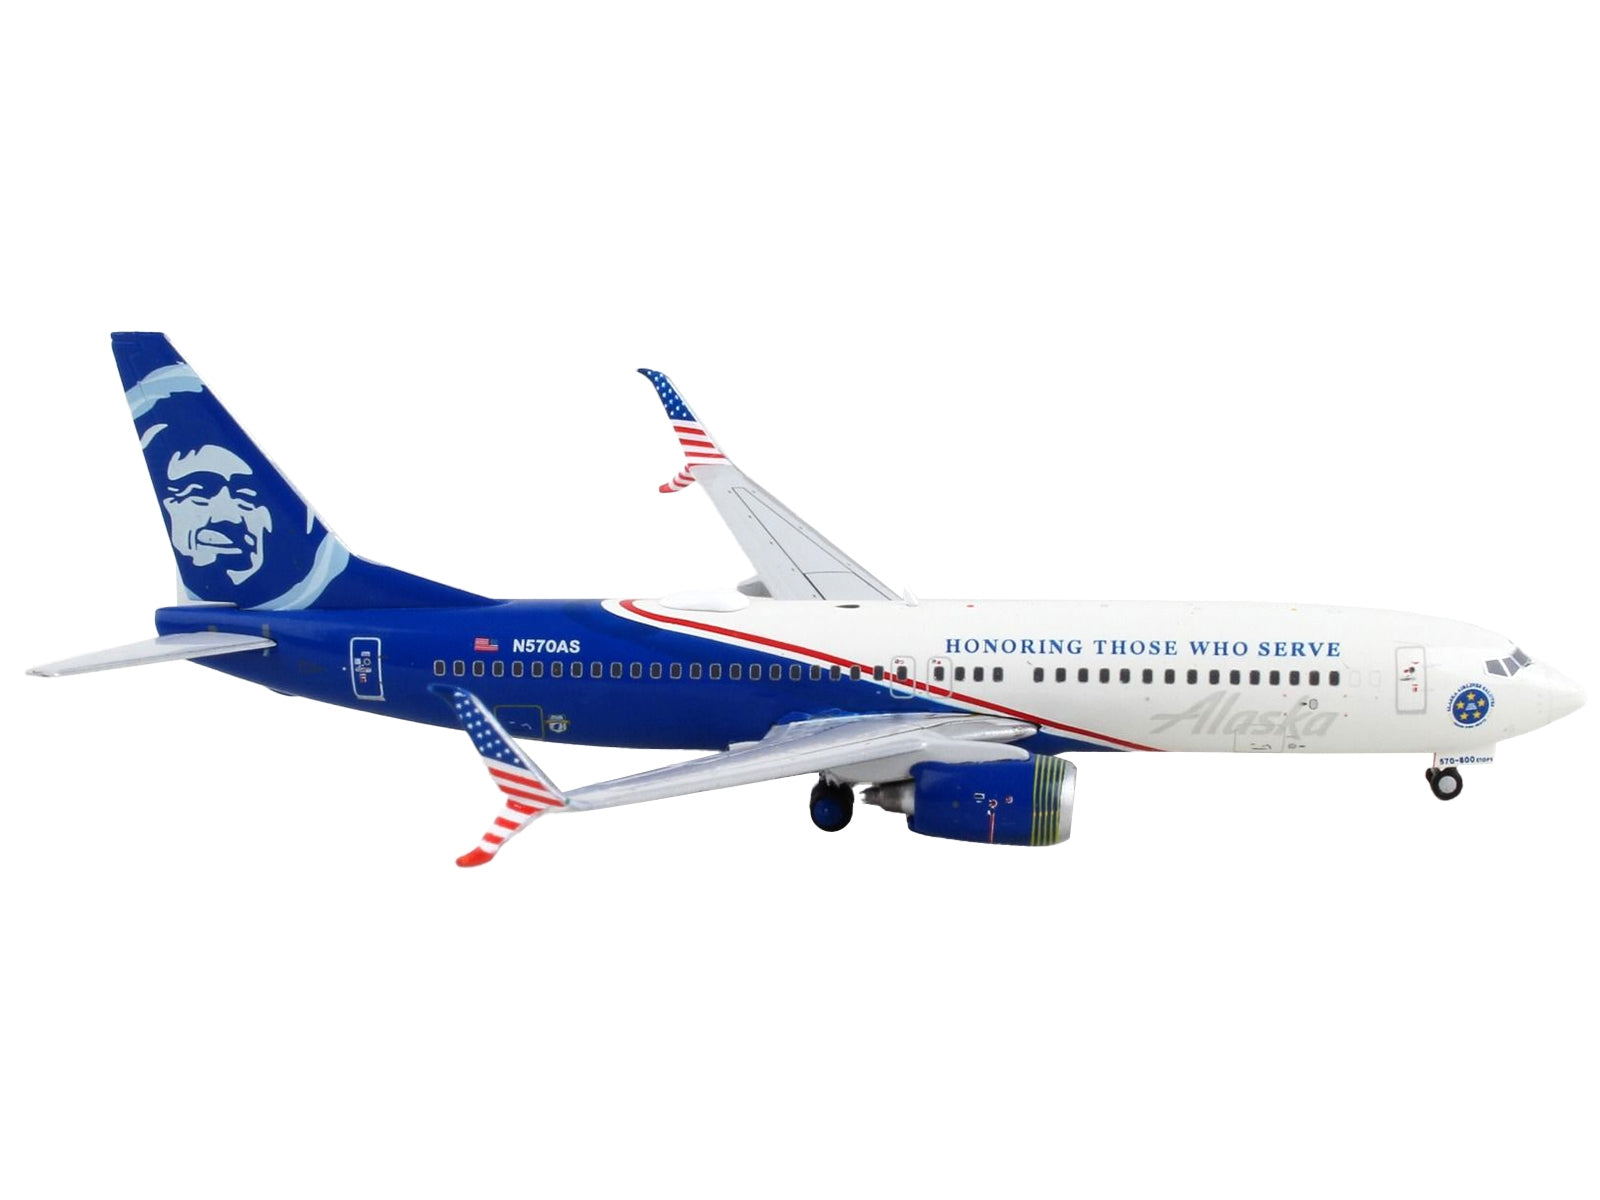 Boeing 737-800 Commercial Aircraft "Alaska Airlines - Honoring Those Who Serve" White and Blue 1/400 Diecast Model Airplane by GeminiJets